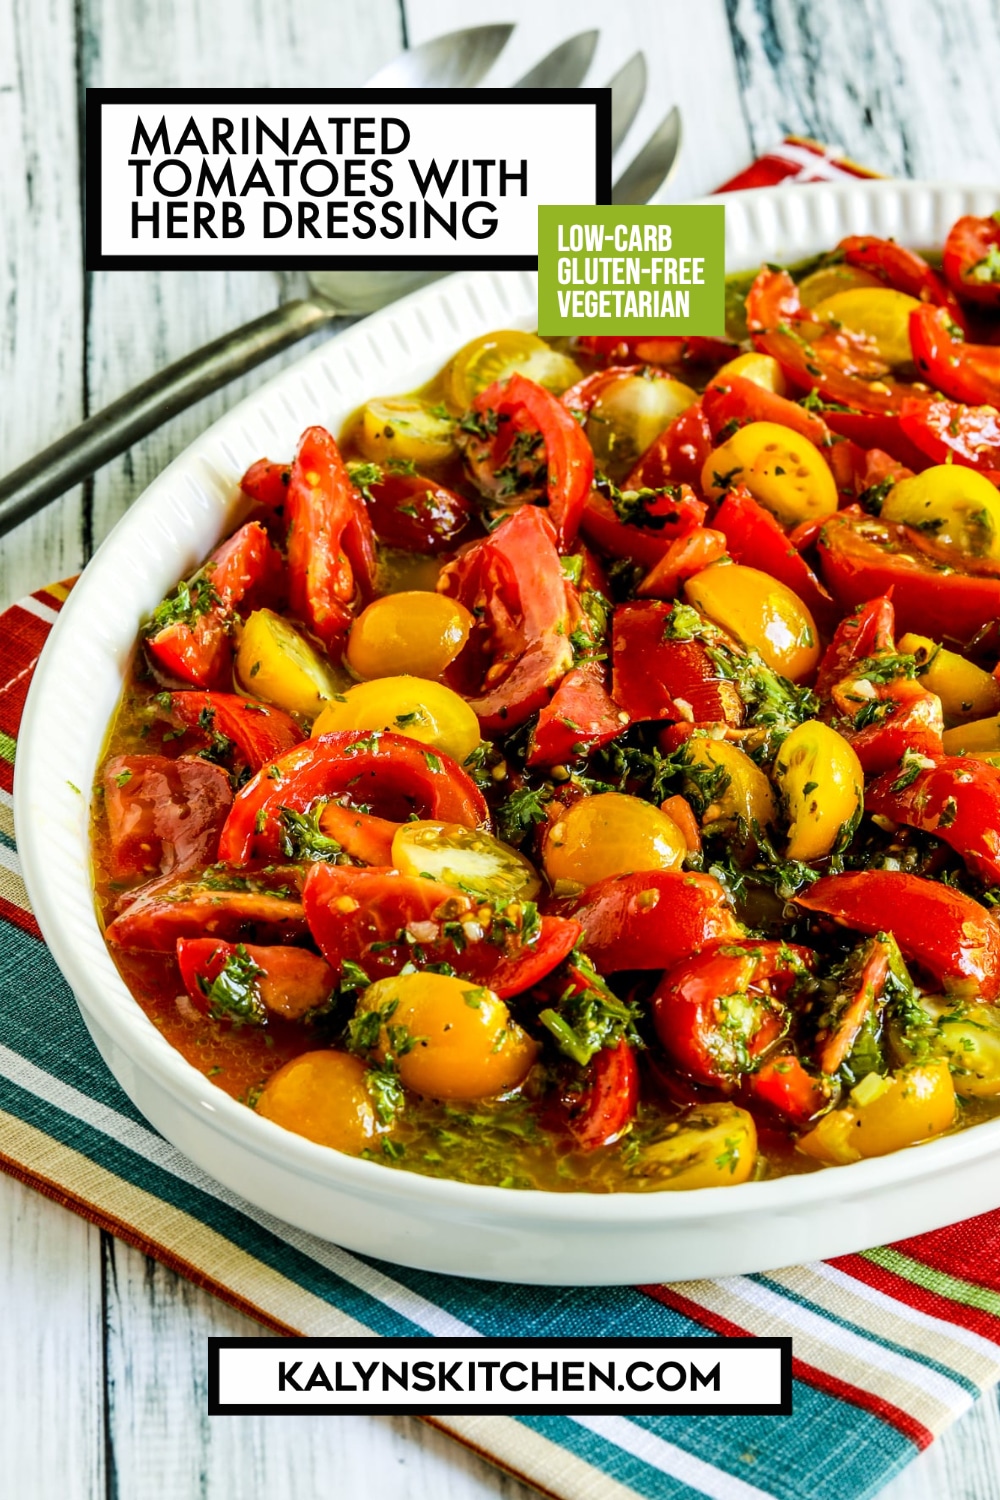 Pinterest image of Marinated Tomatoes with Herb Dressing